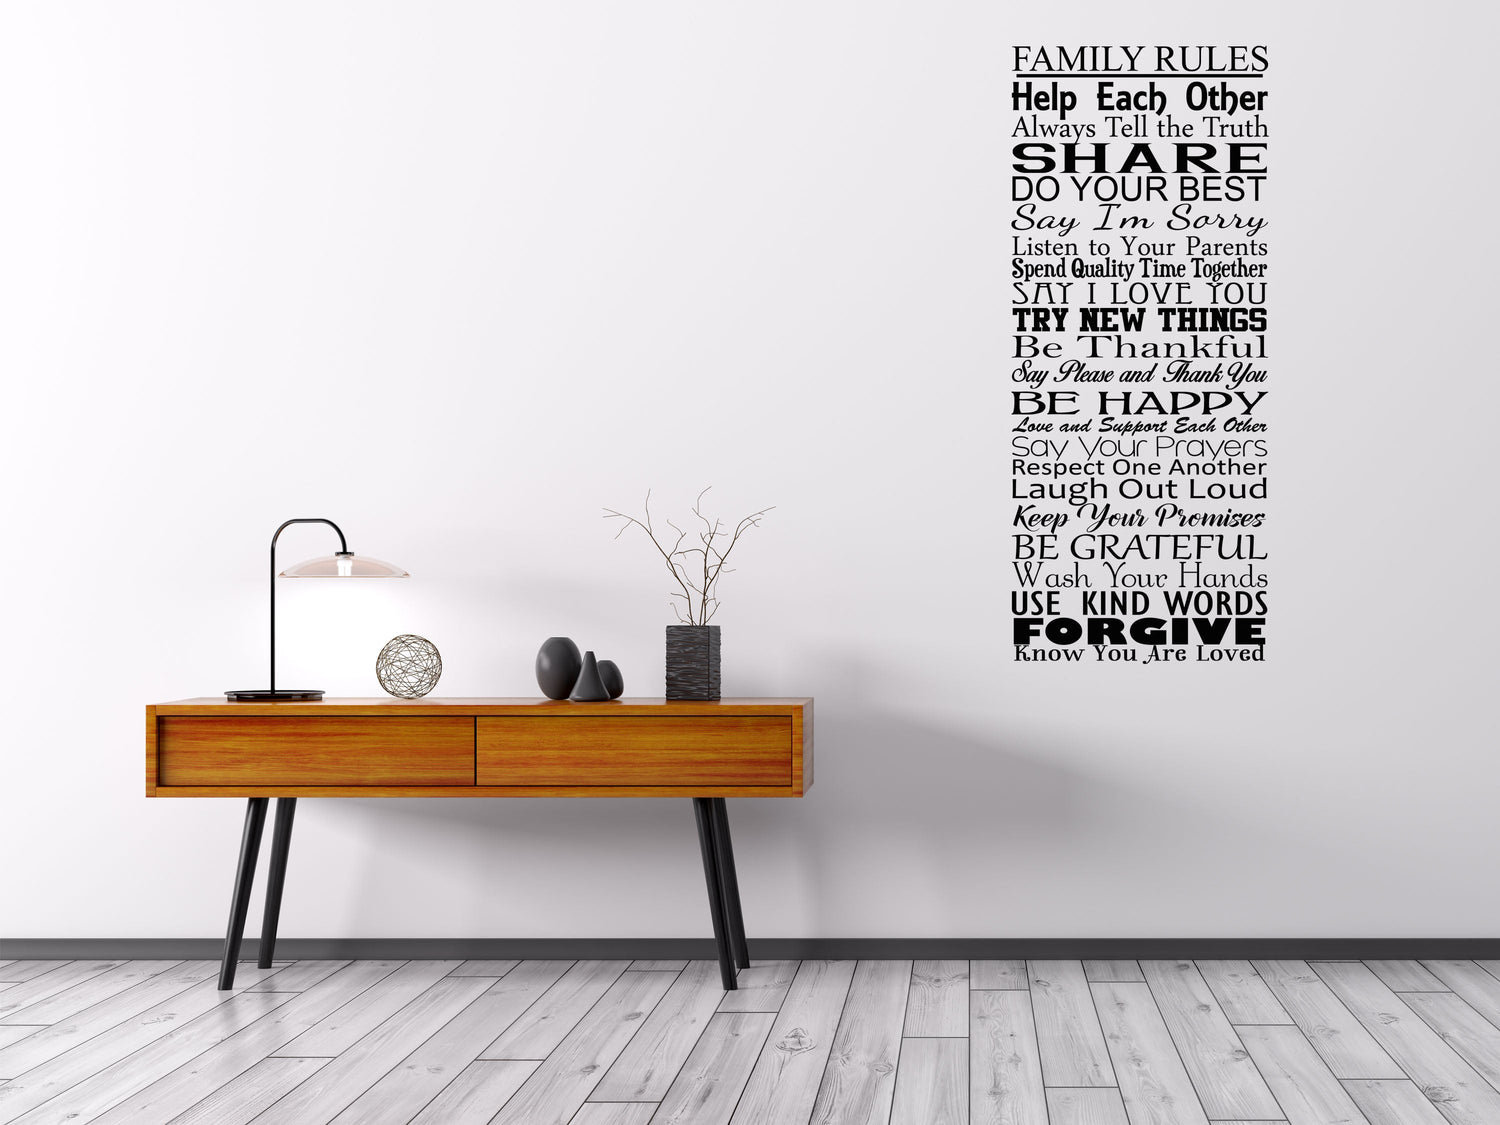 Family Rules Vinyl Wall Decal Decor - Family Wall Decal - Living Room Decal - Family Room Decal - Family Rules Quotes Vinyl Wall Decal Inspirational Wall Signs 